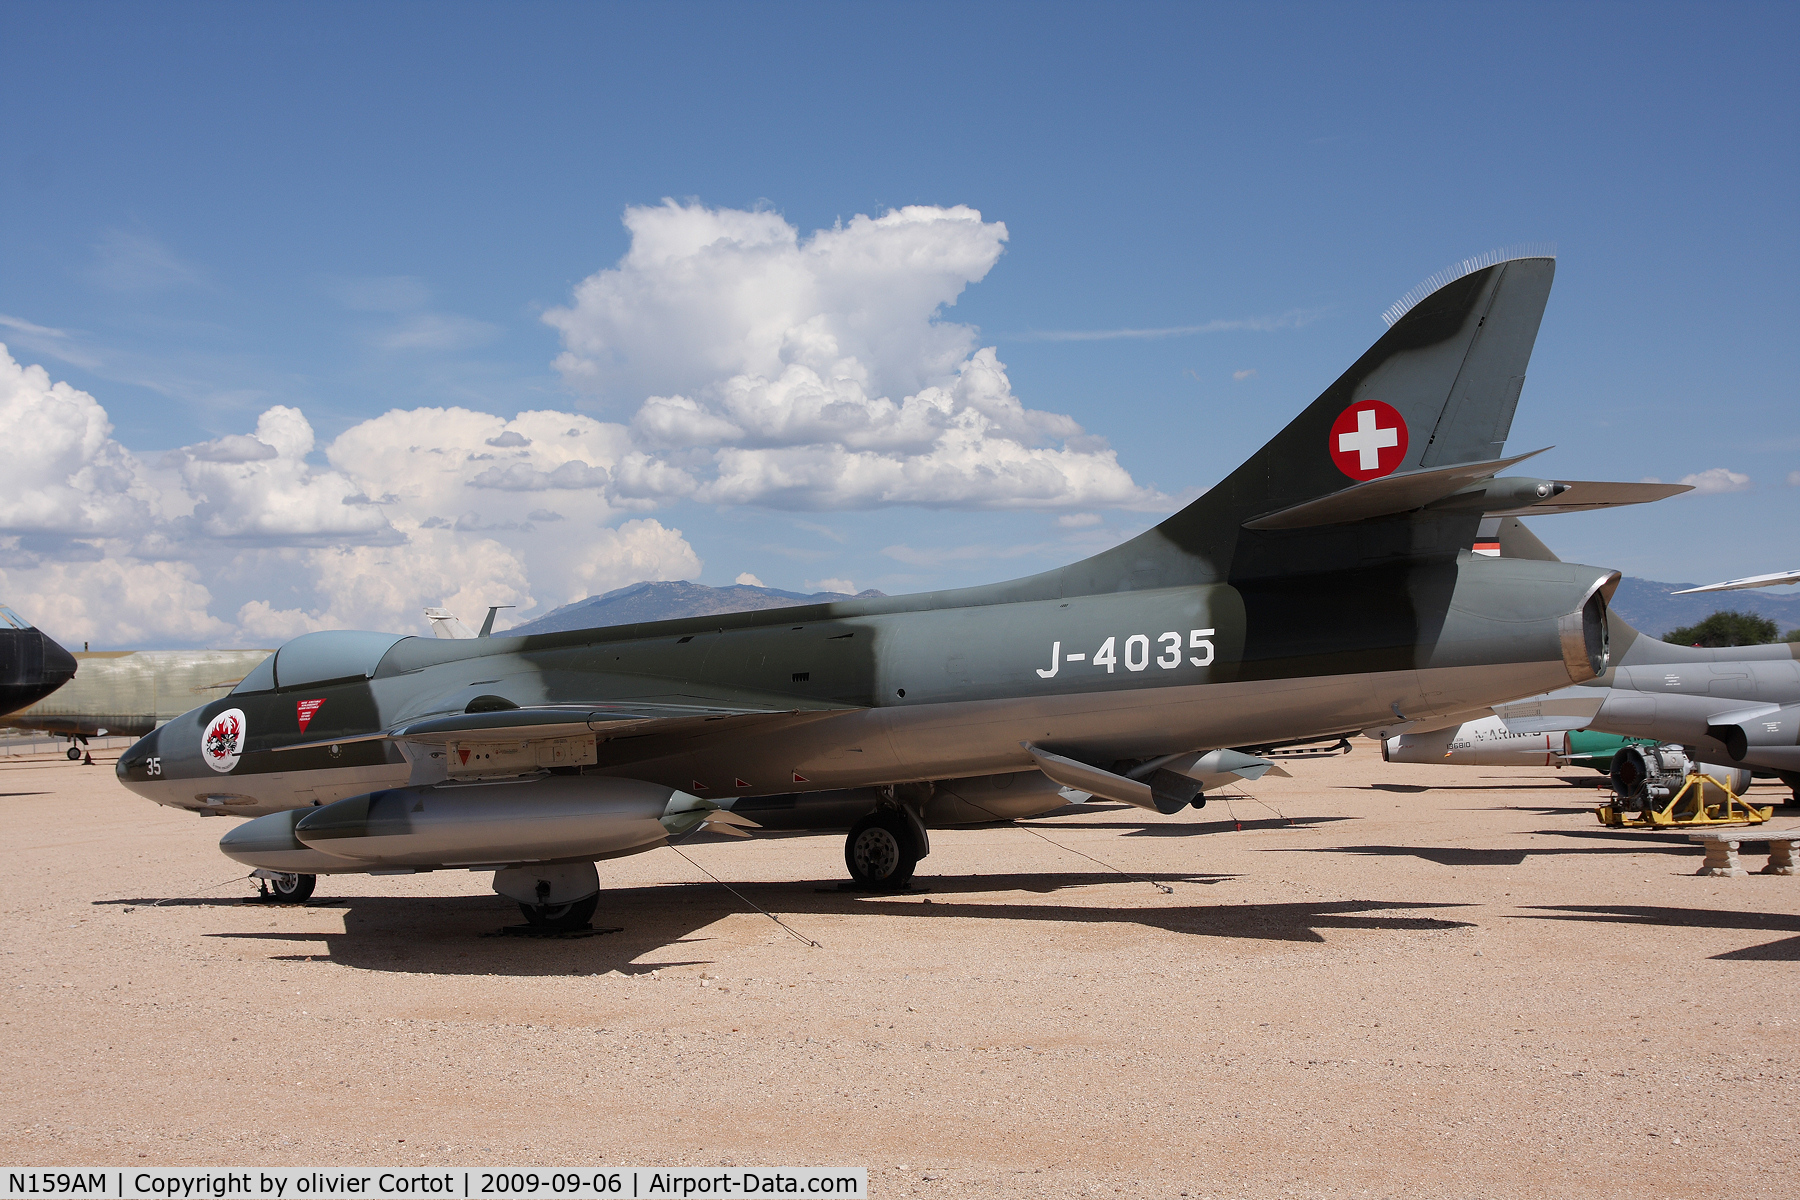 N159AM, Hawker Hunter F.58 C/N 41H-697402, Now part of the Pima Air Museum